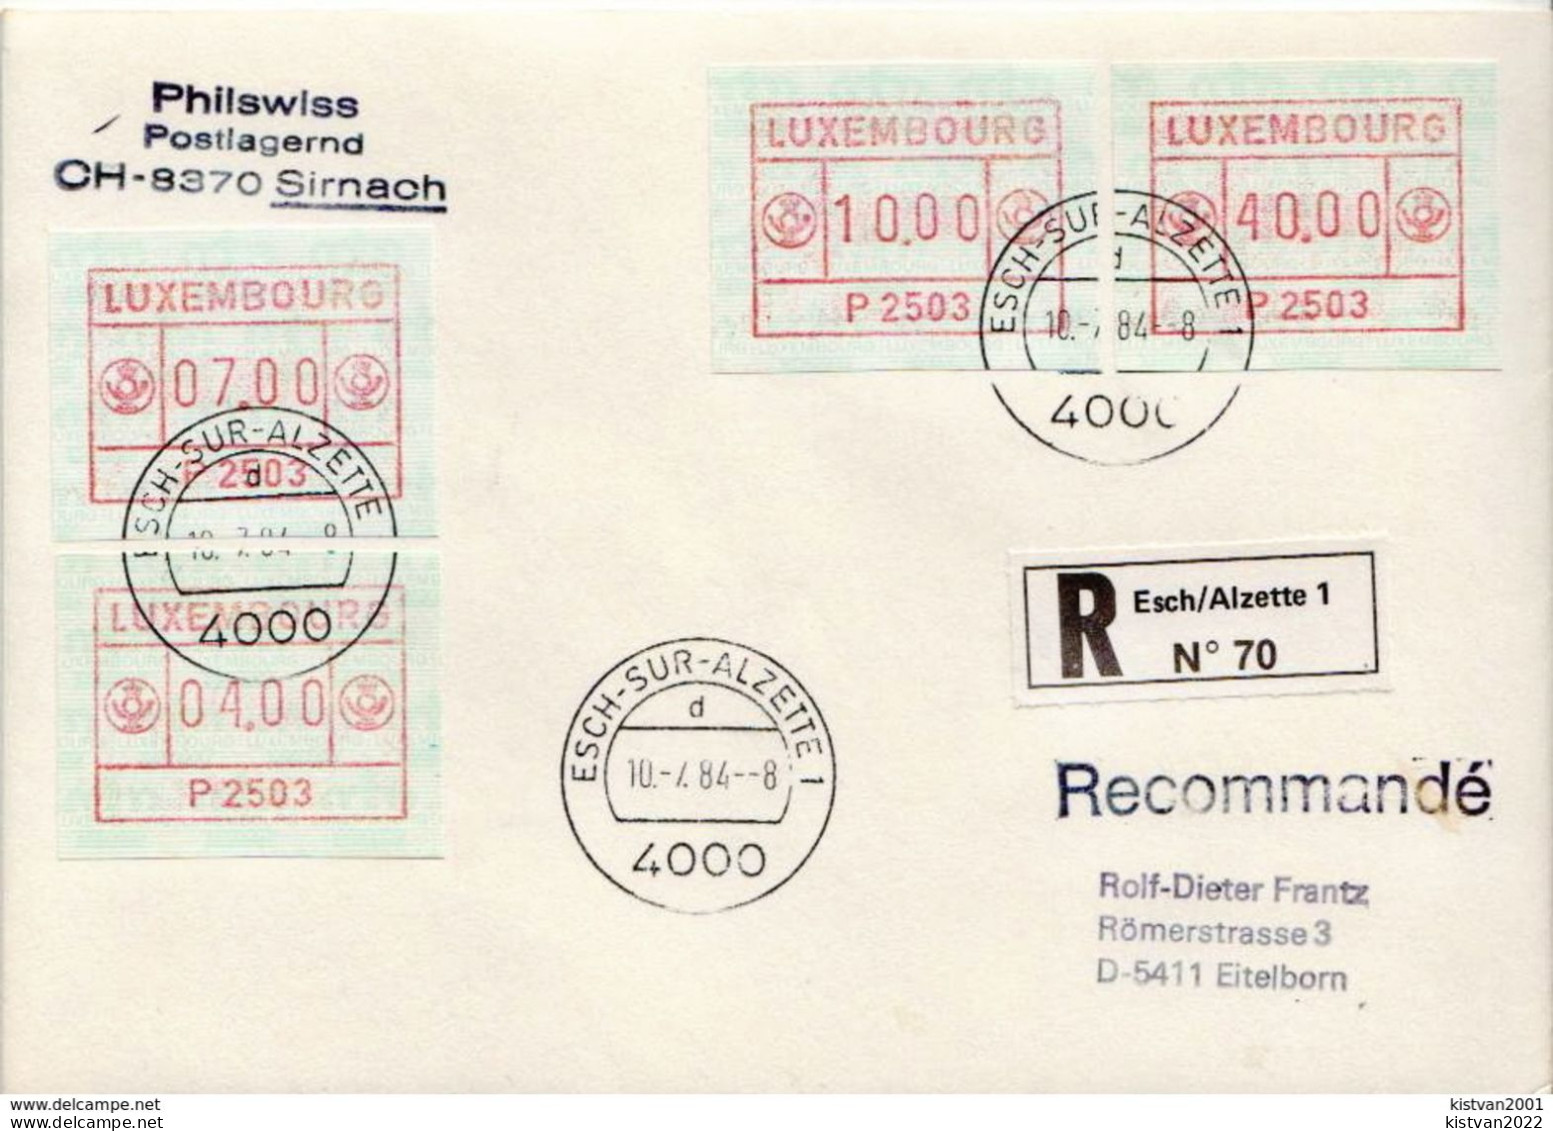 Postal History: Luxembourg R Cover With Automat Stamps - Franking Machines (EMA)